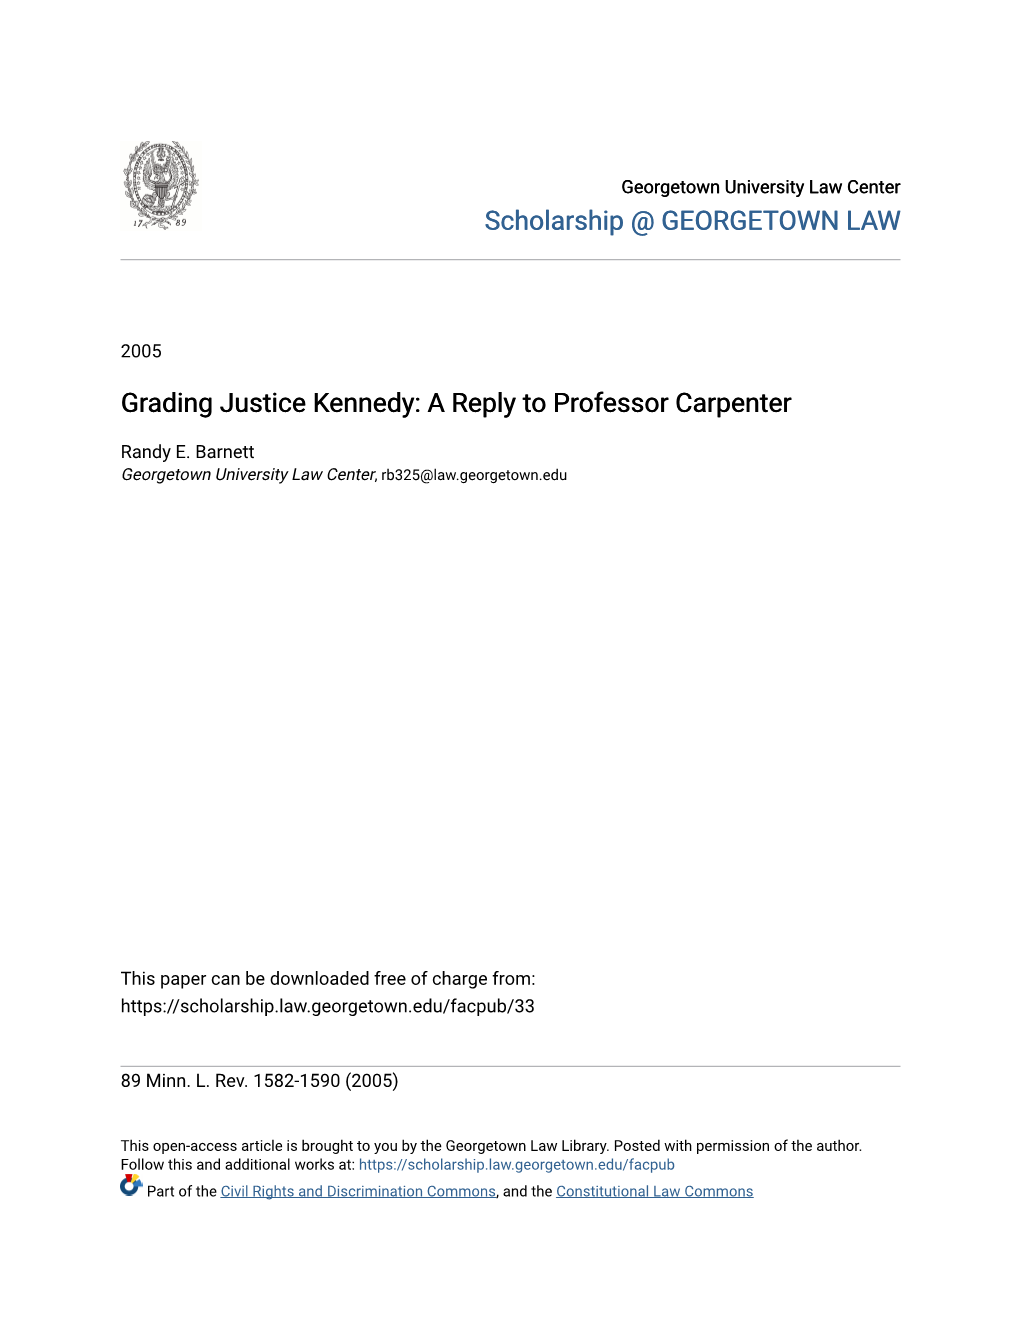 Grading Justice Kennedy: a Reply to Professor Carpenter